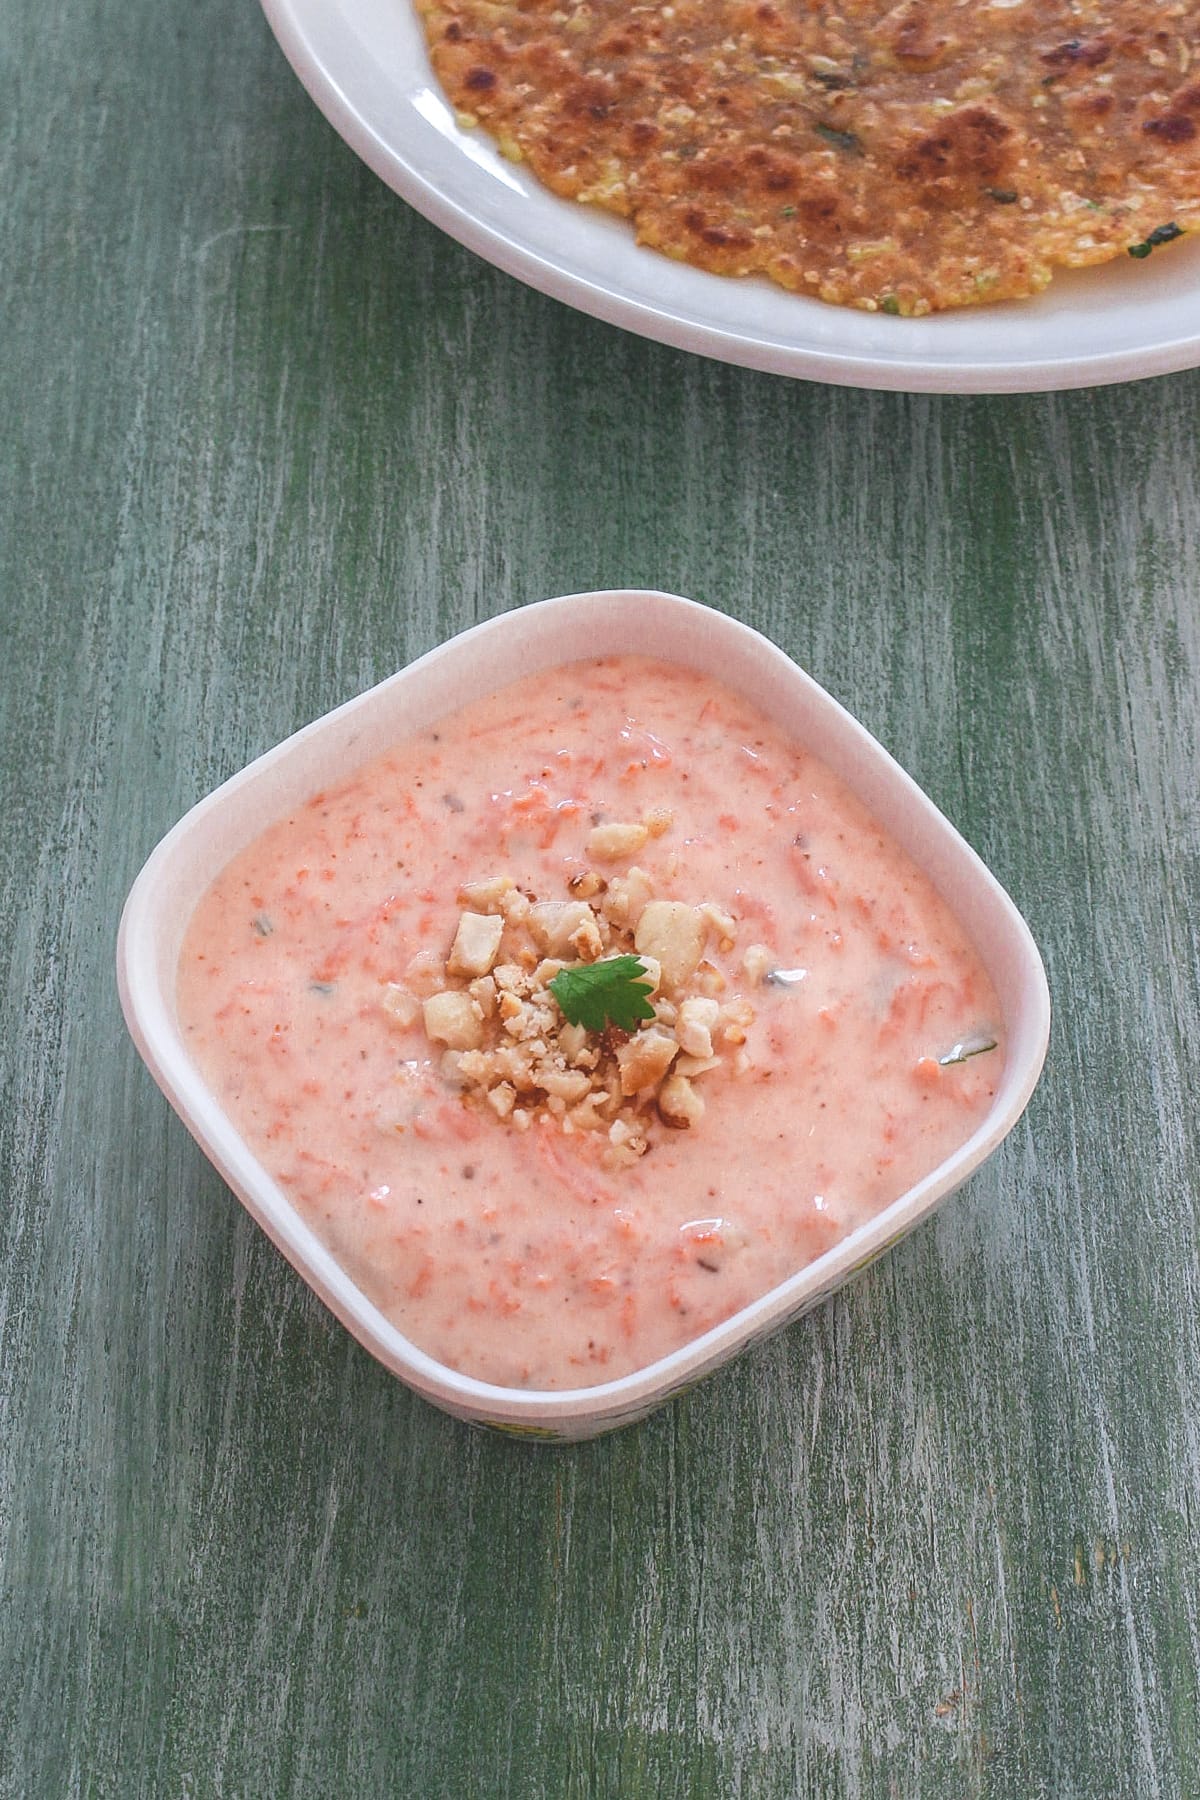 Carrot raita garnished with crushed peanuts and served with paratha.